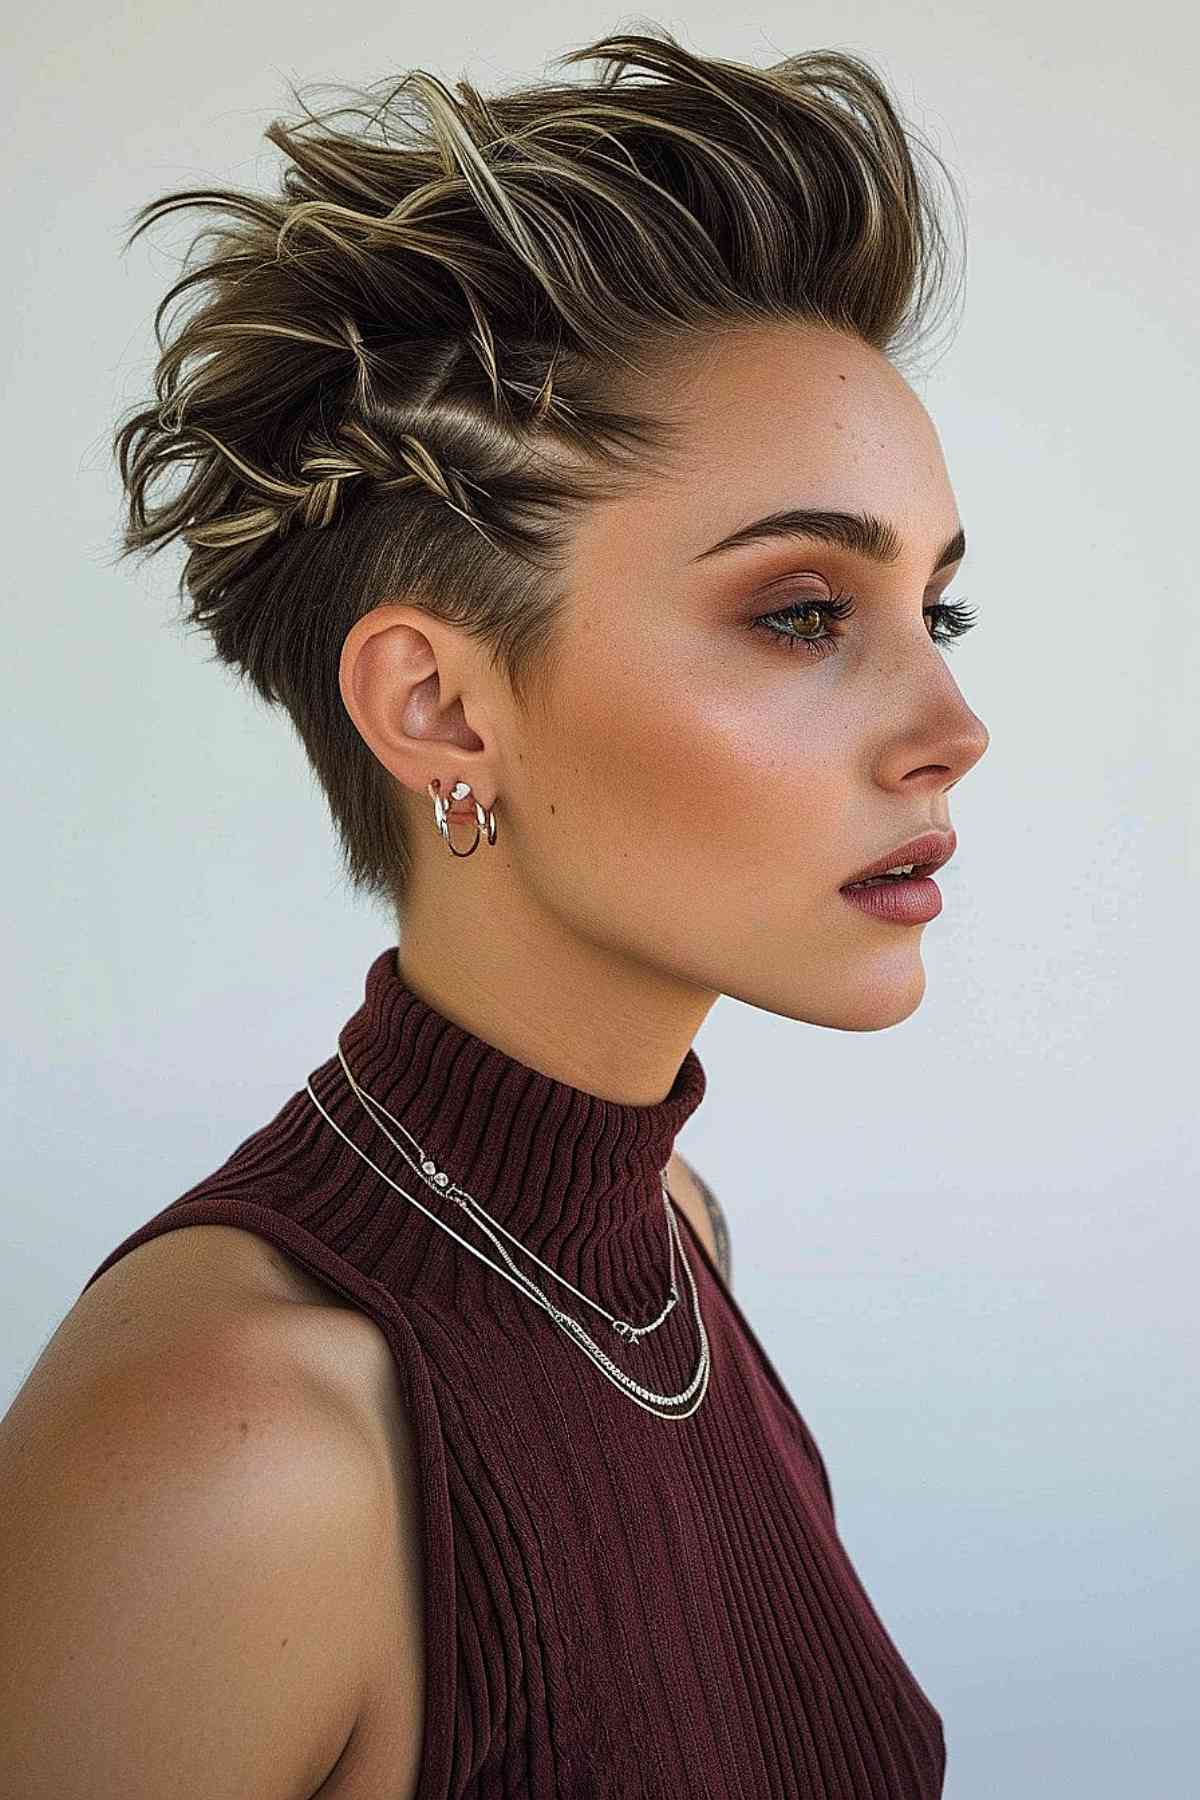 Short Edgy Hairstyle with Twists